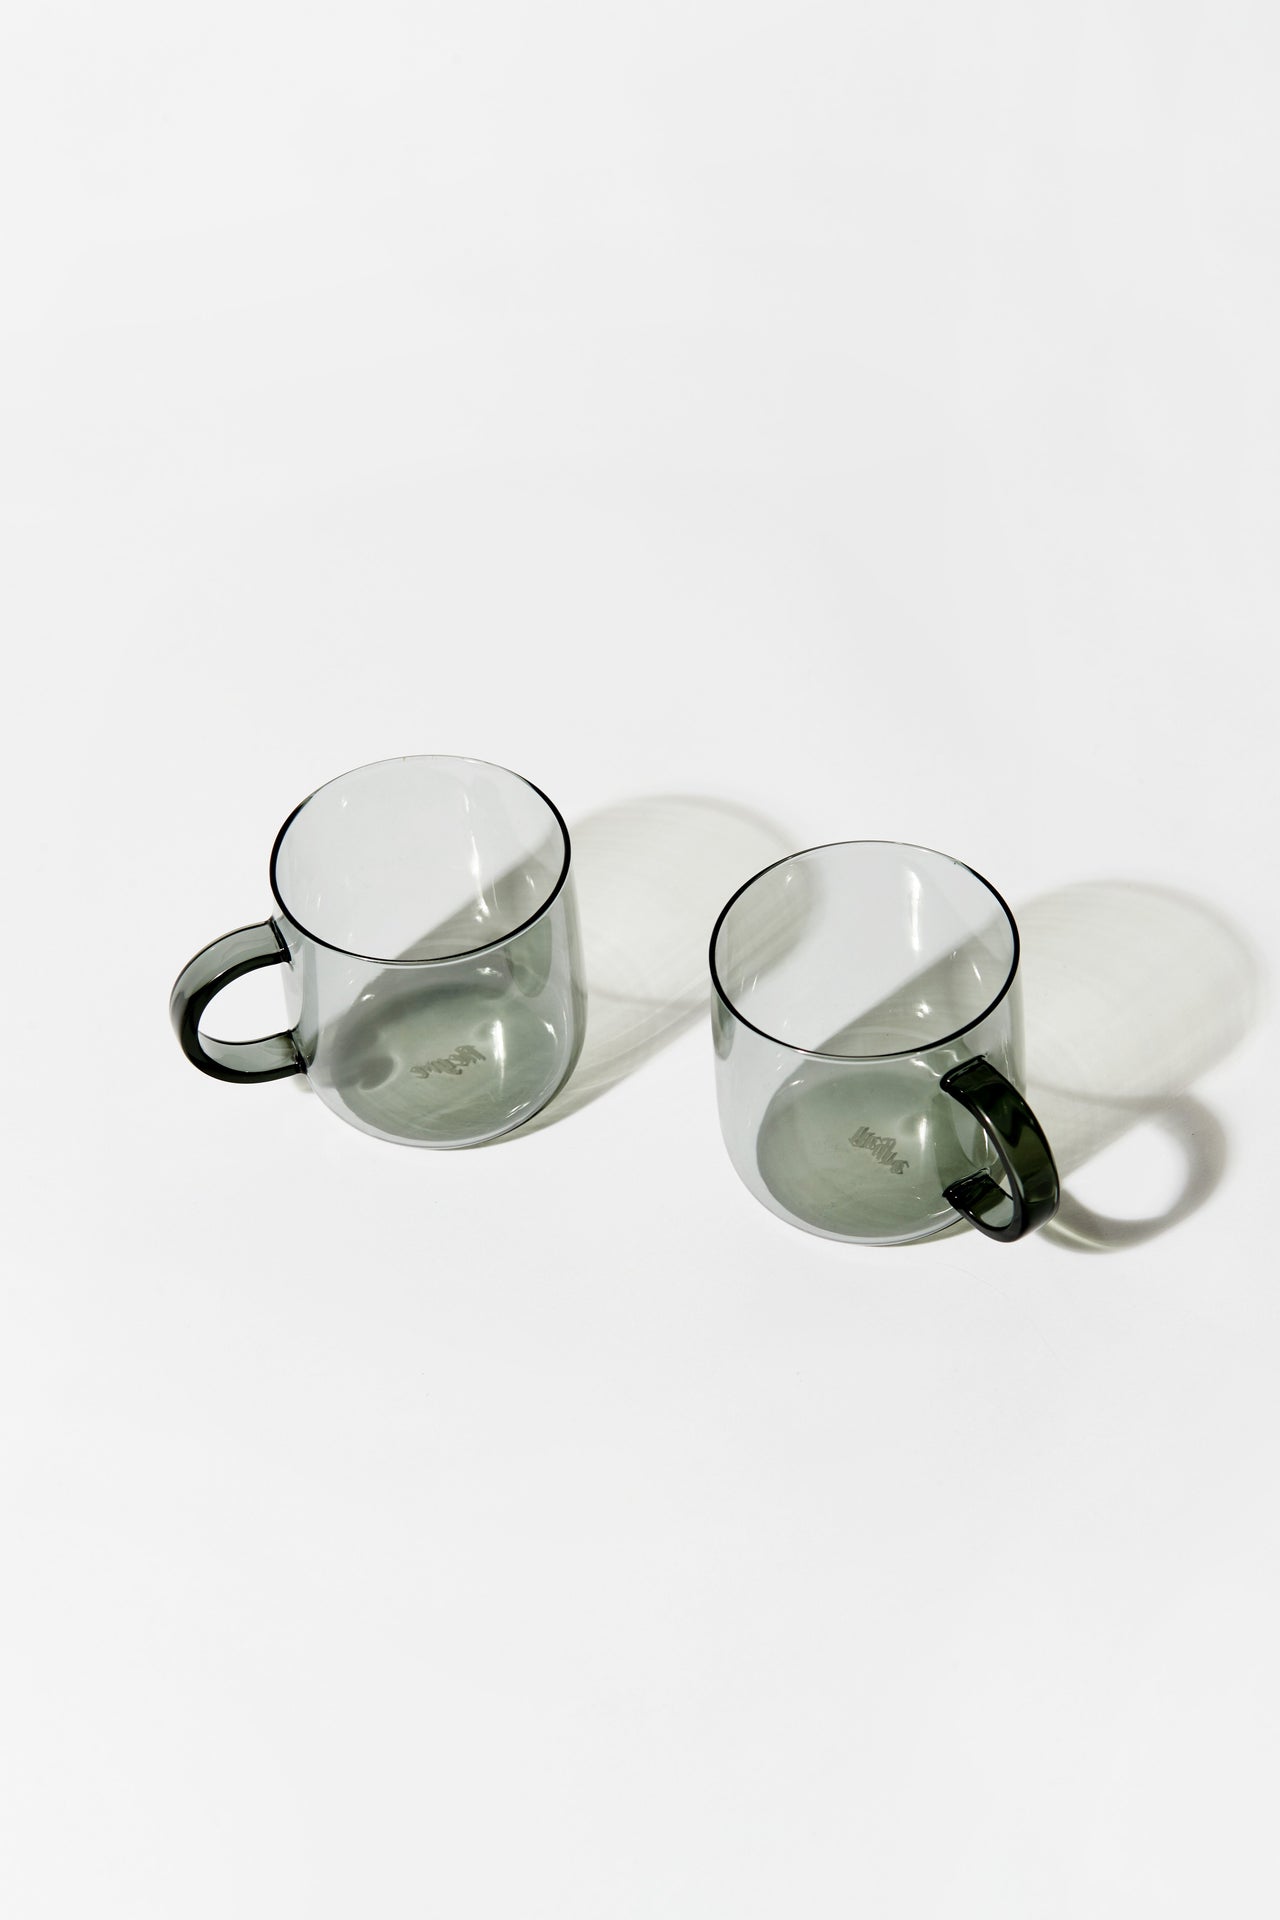 CORO CUP SET IN CHARCOAL